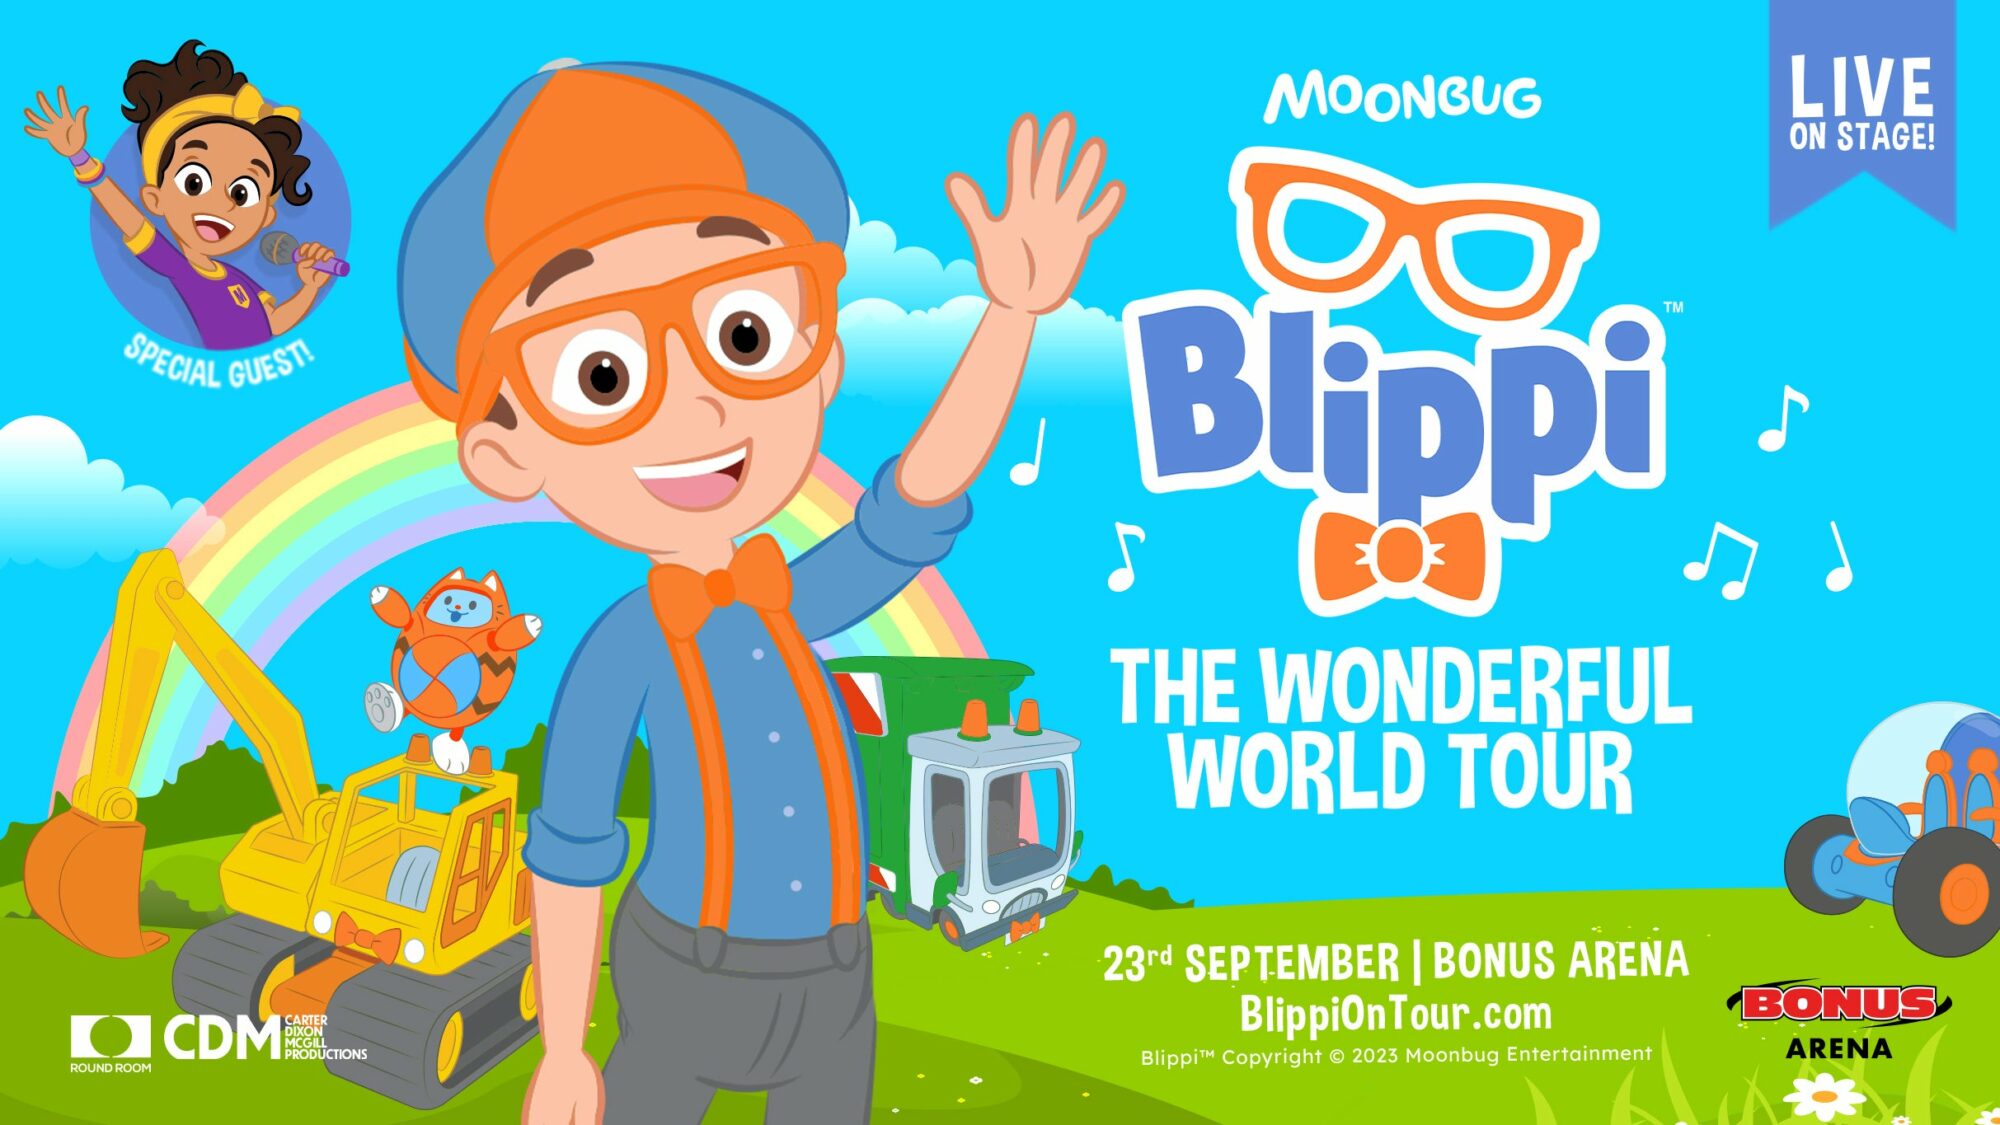 Image name Blippi The Wonderful World Tour at Bonus Arena Hull Hull the 34 image from the post Blippi - The Wonderful World Tour at Connexin Live, Hull in Yorkshire.com.